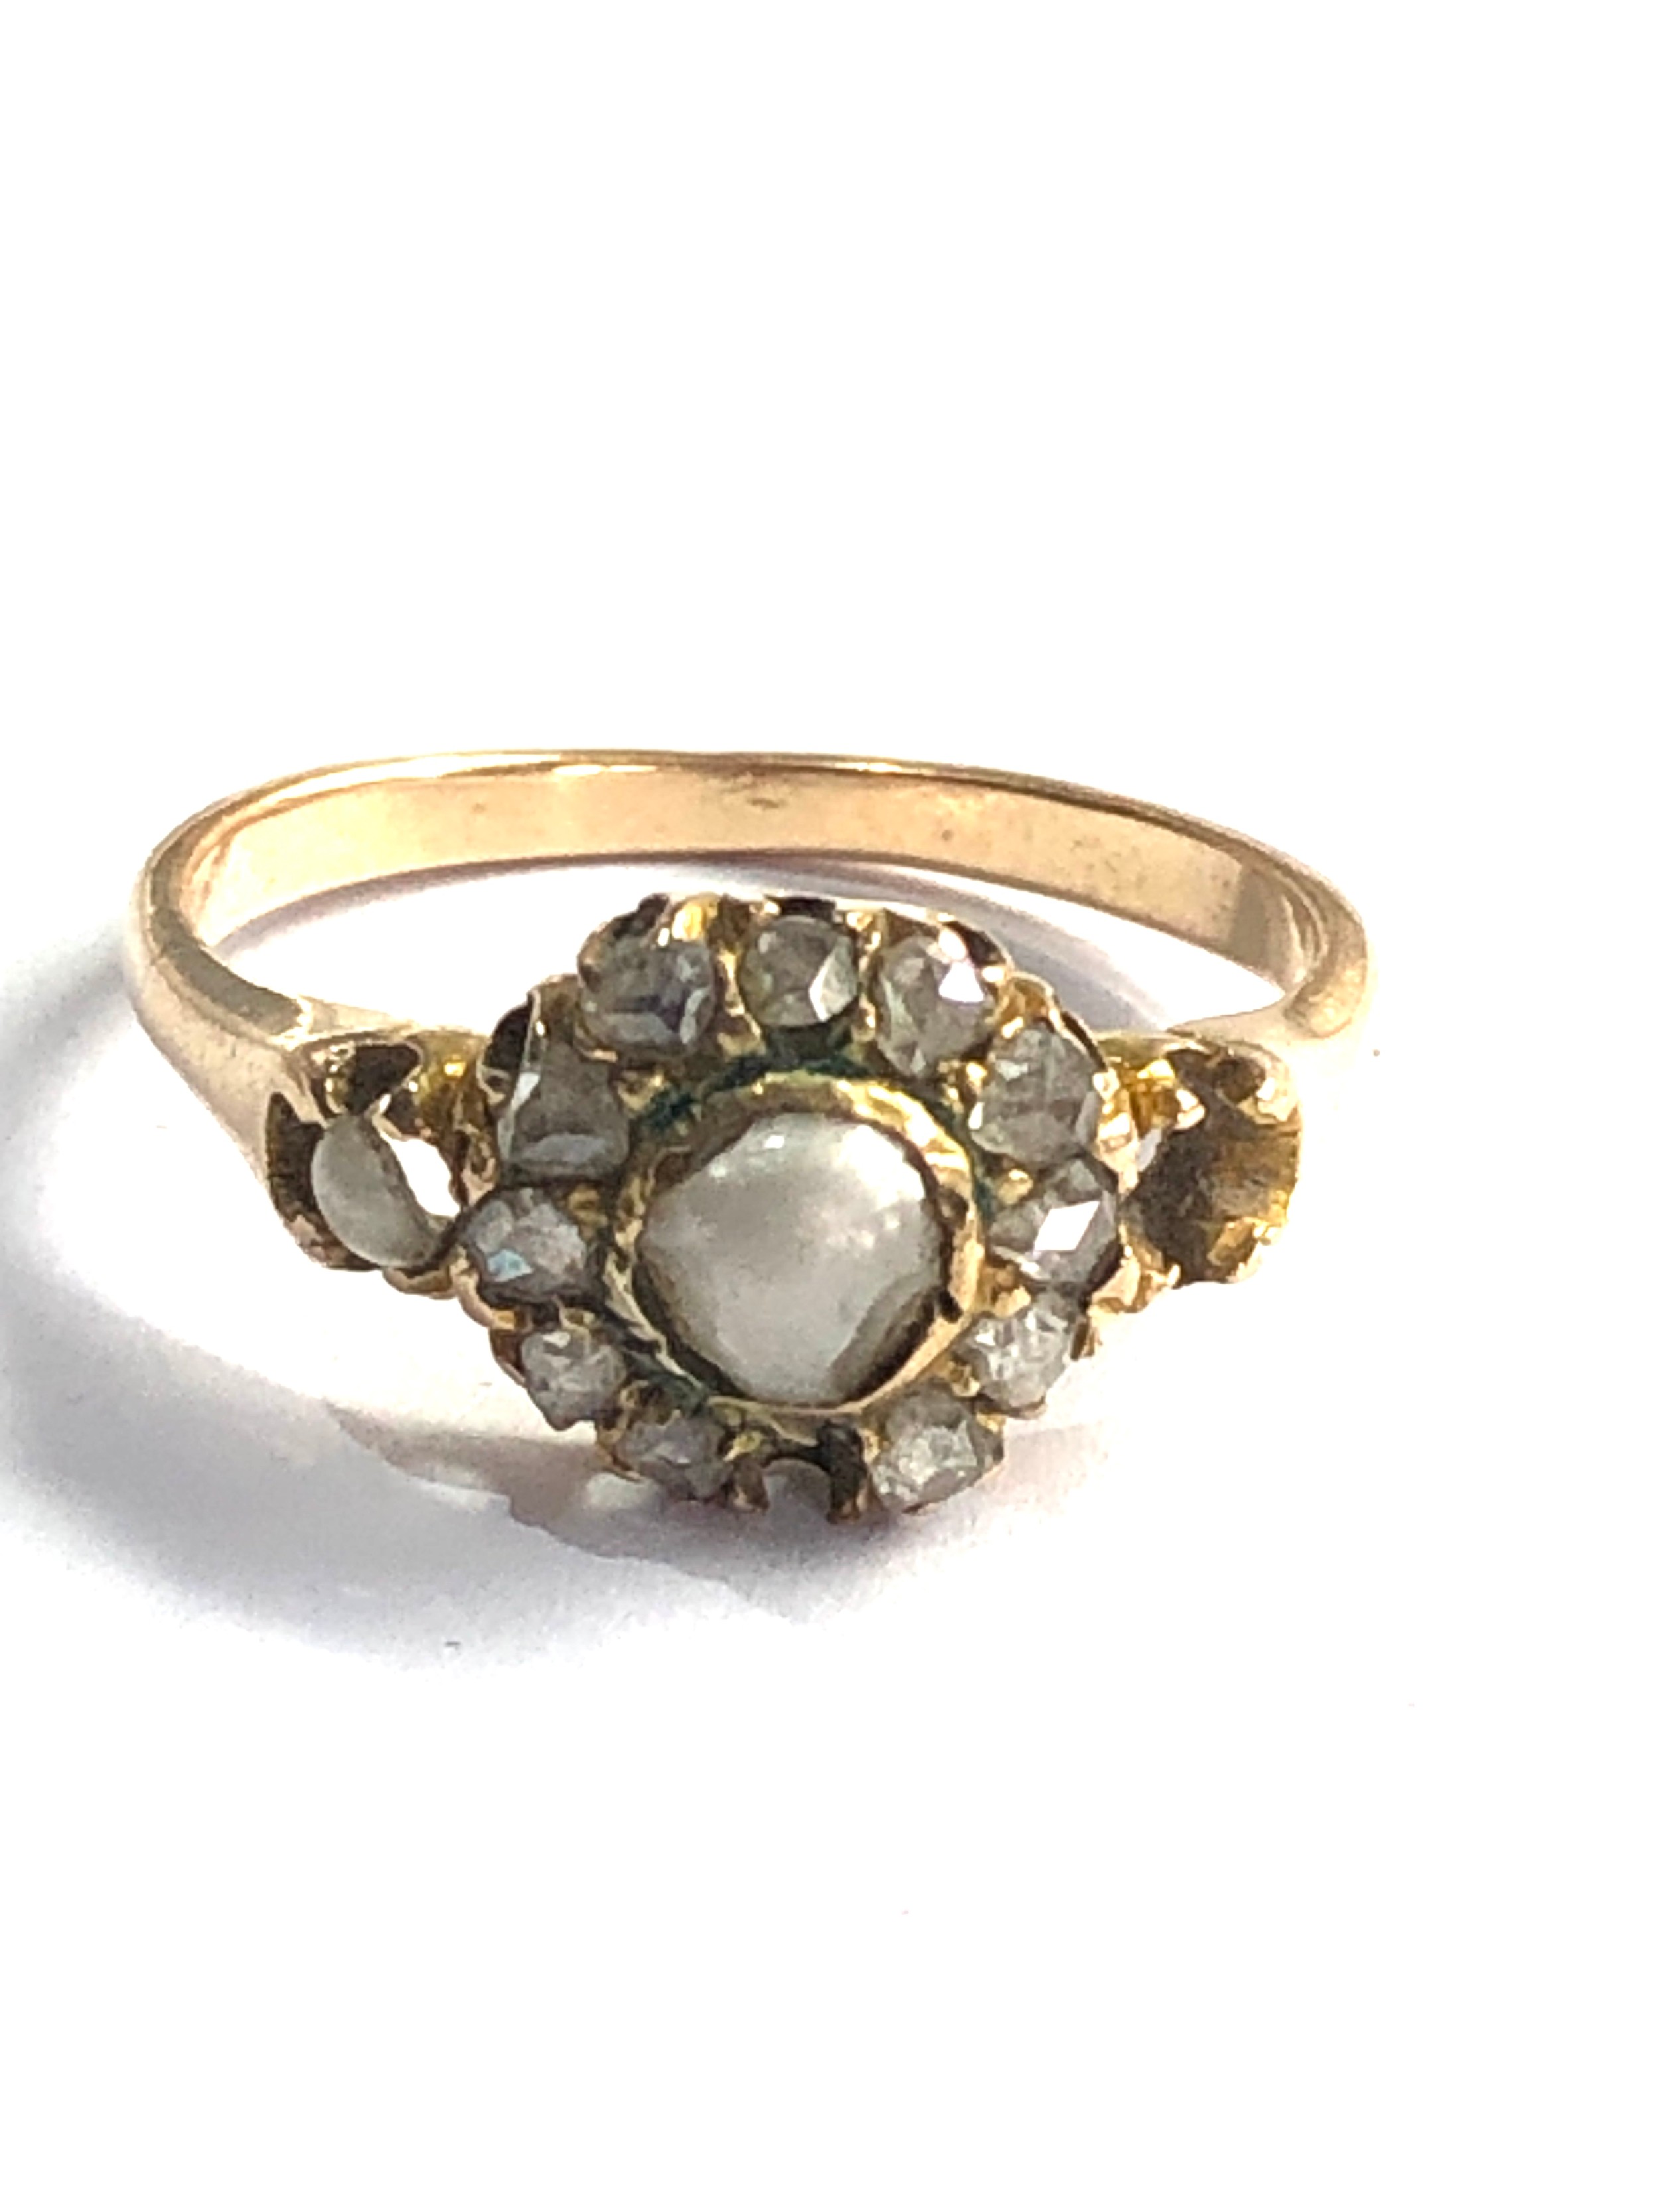 15ct gold antique pearl & rose cut diamonds ring missing stones as shown in images (2.8g)